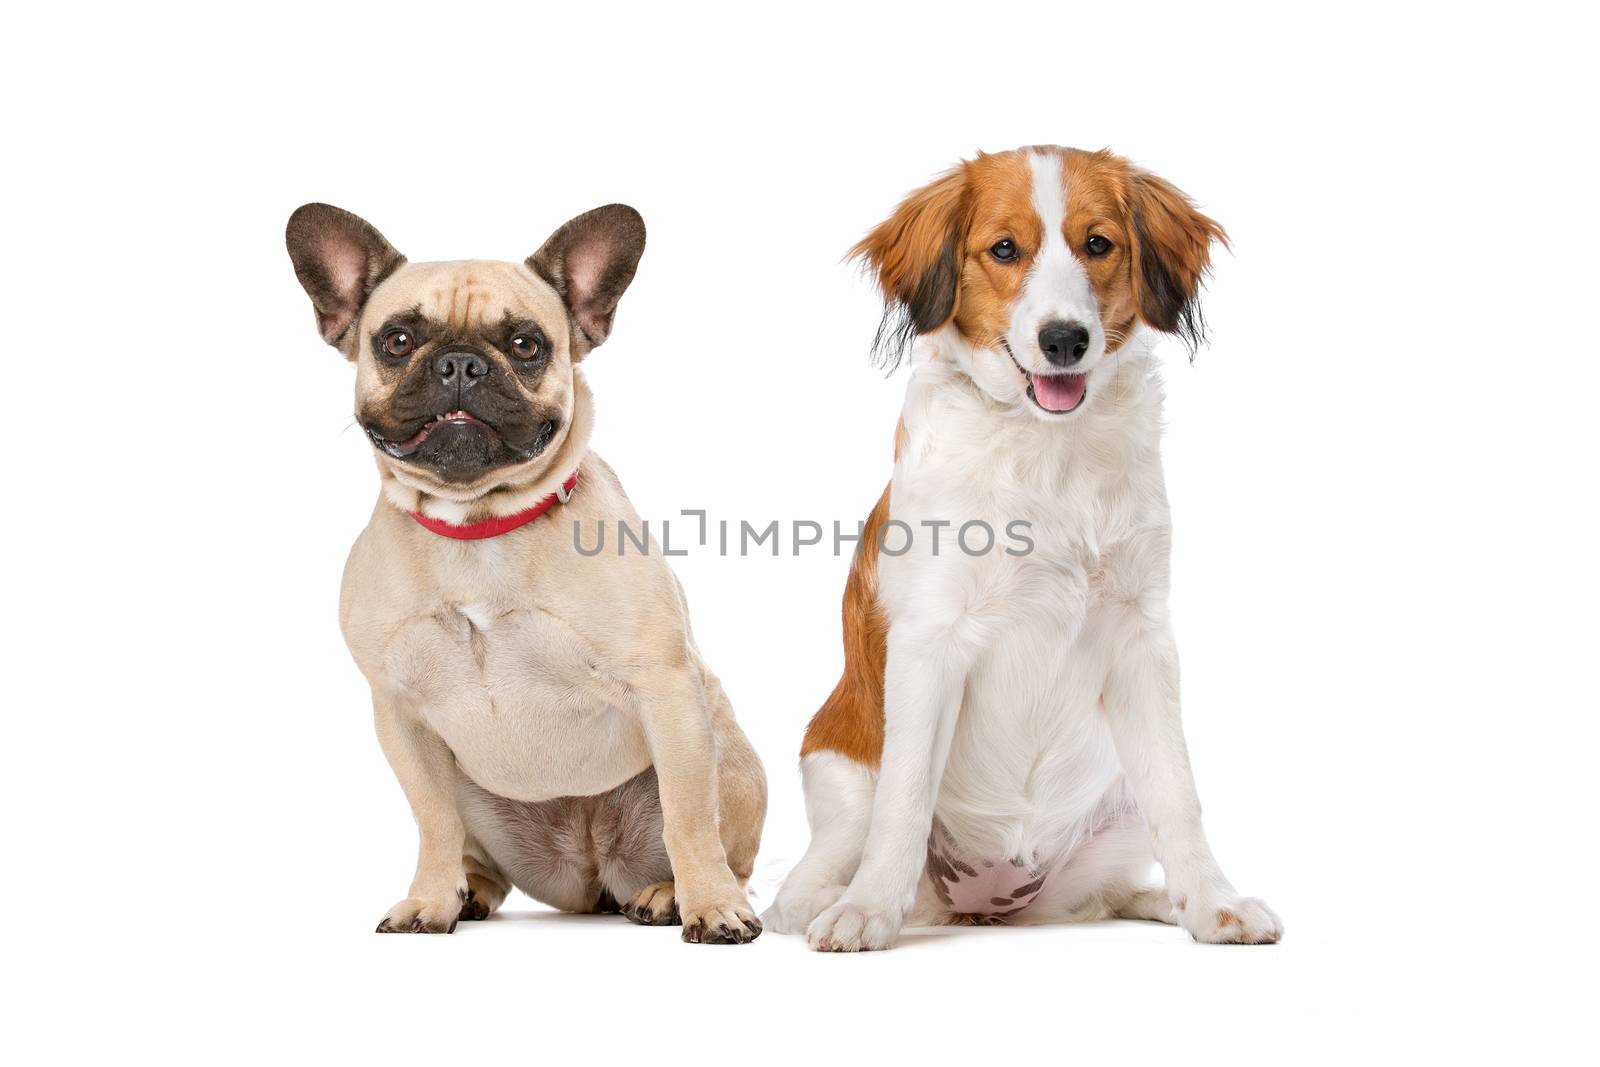 French Bulldog and a Kooiker Dog in front of a white background